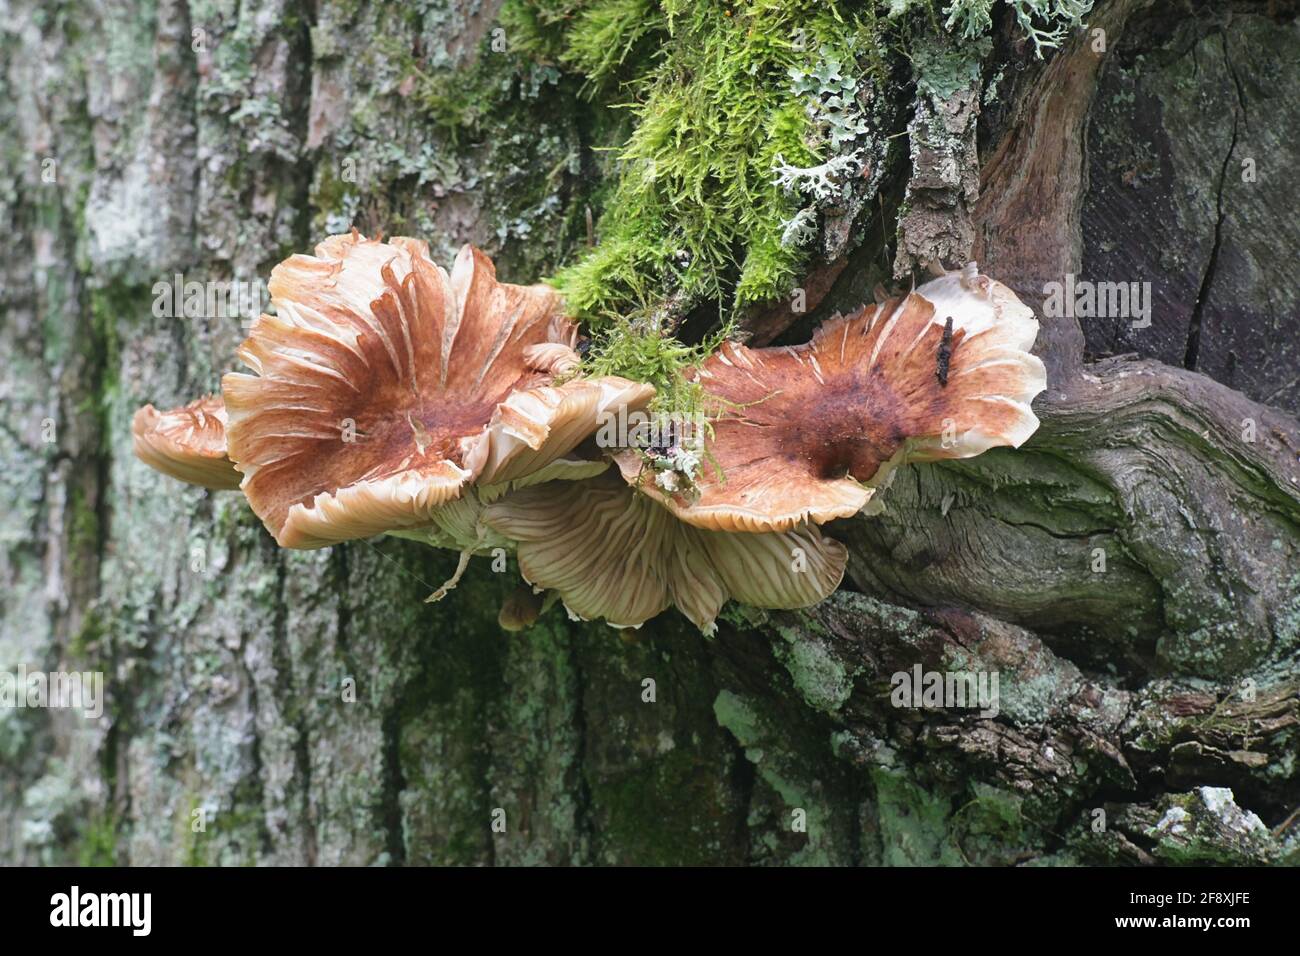 Armillaria lutea, commonly known as the bulbous honey fungus, wild mushroom from Finland Stock Photo